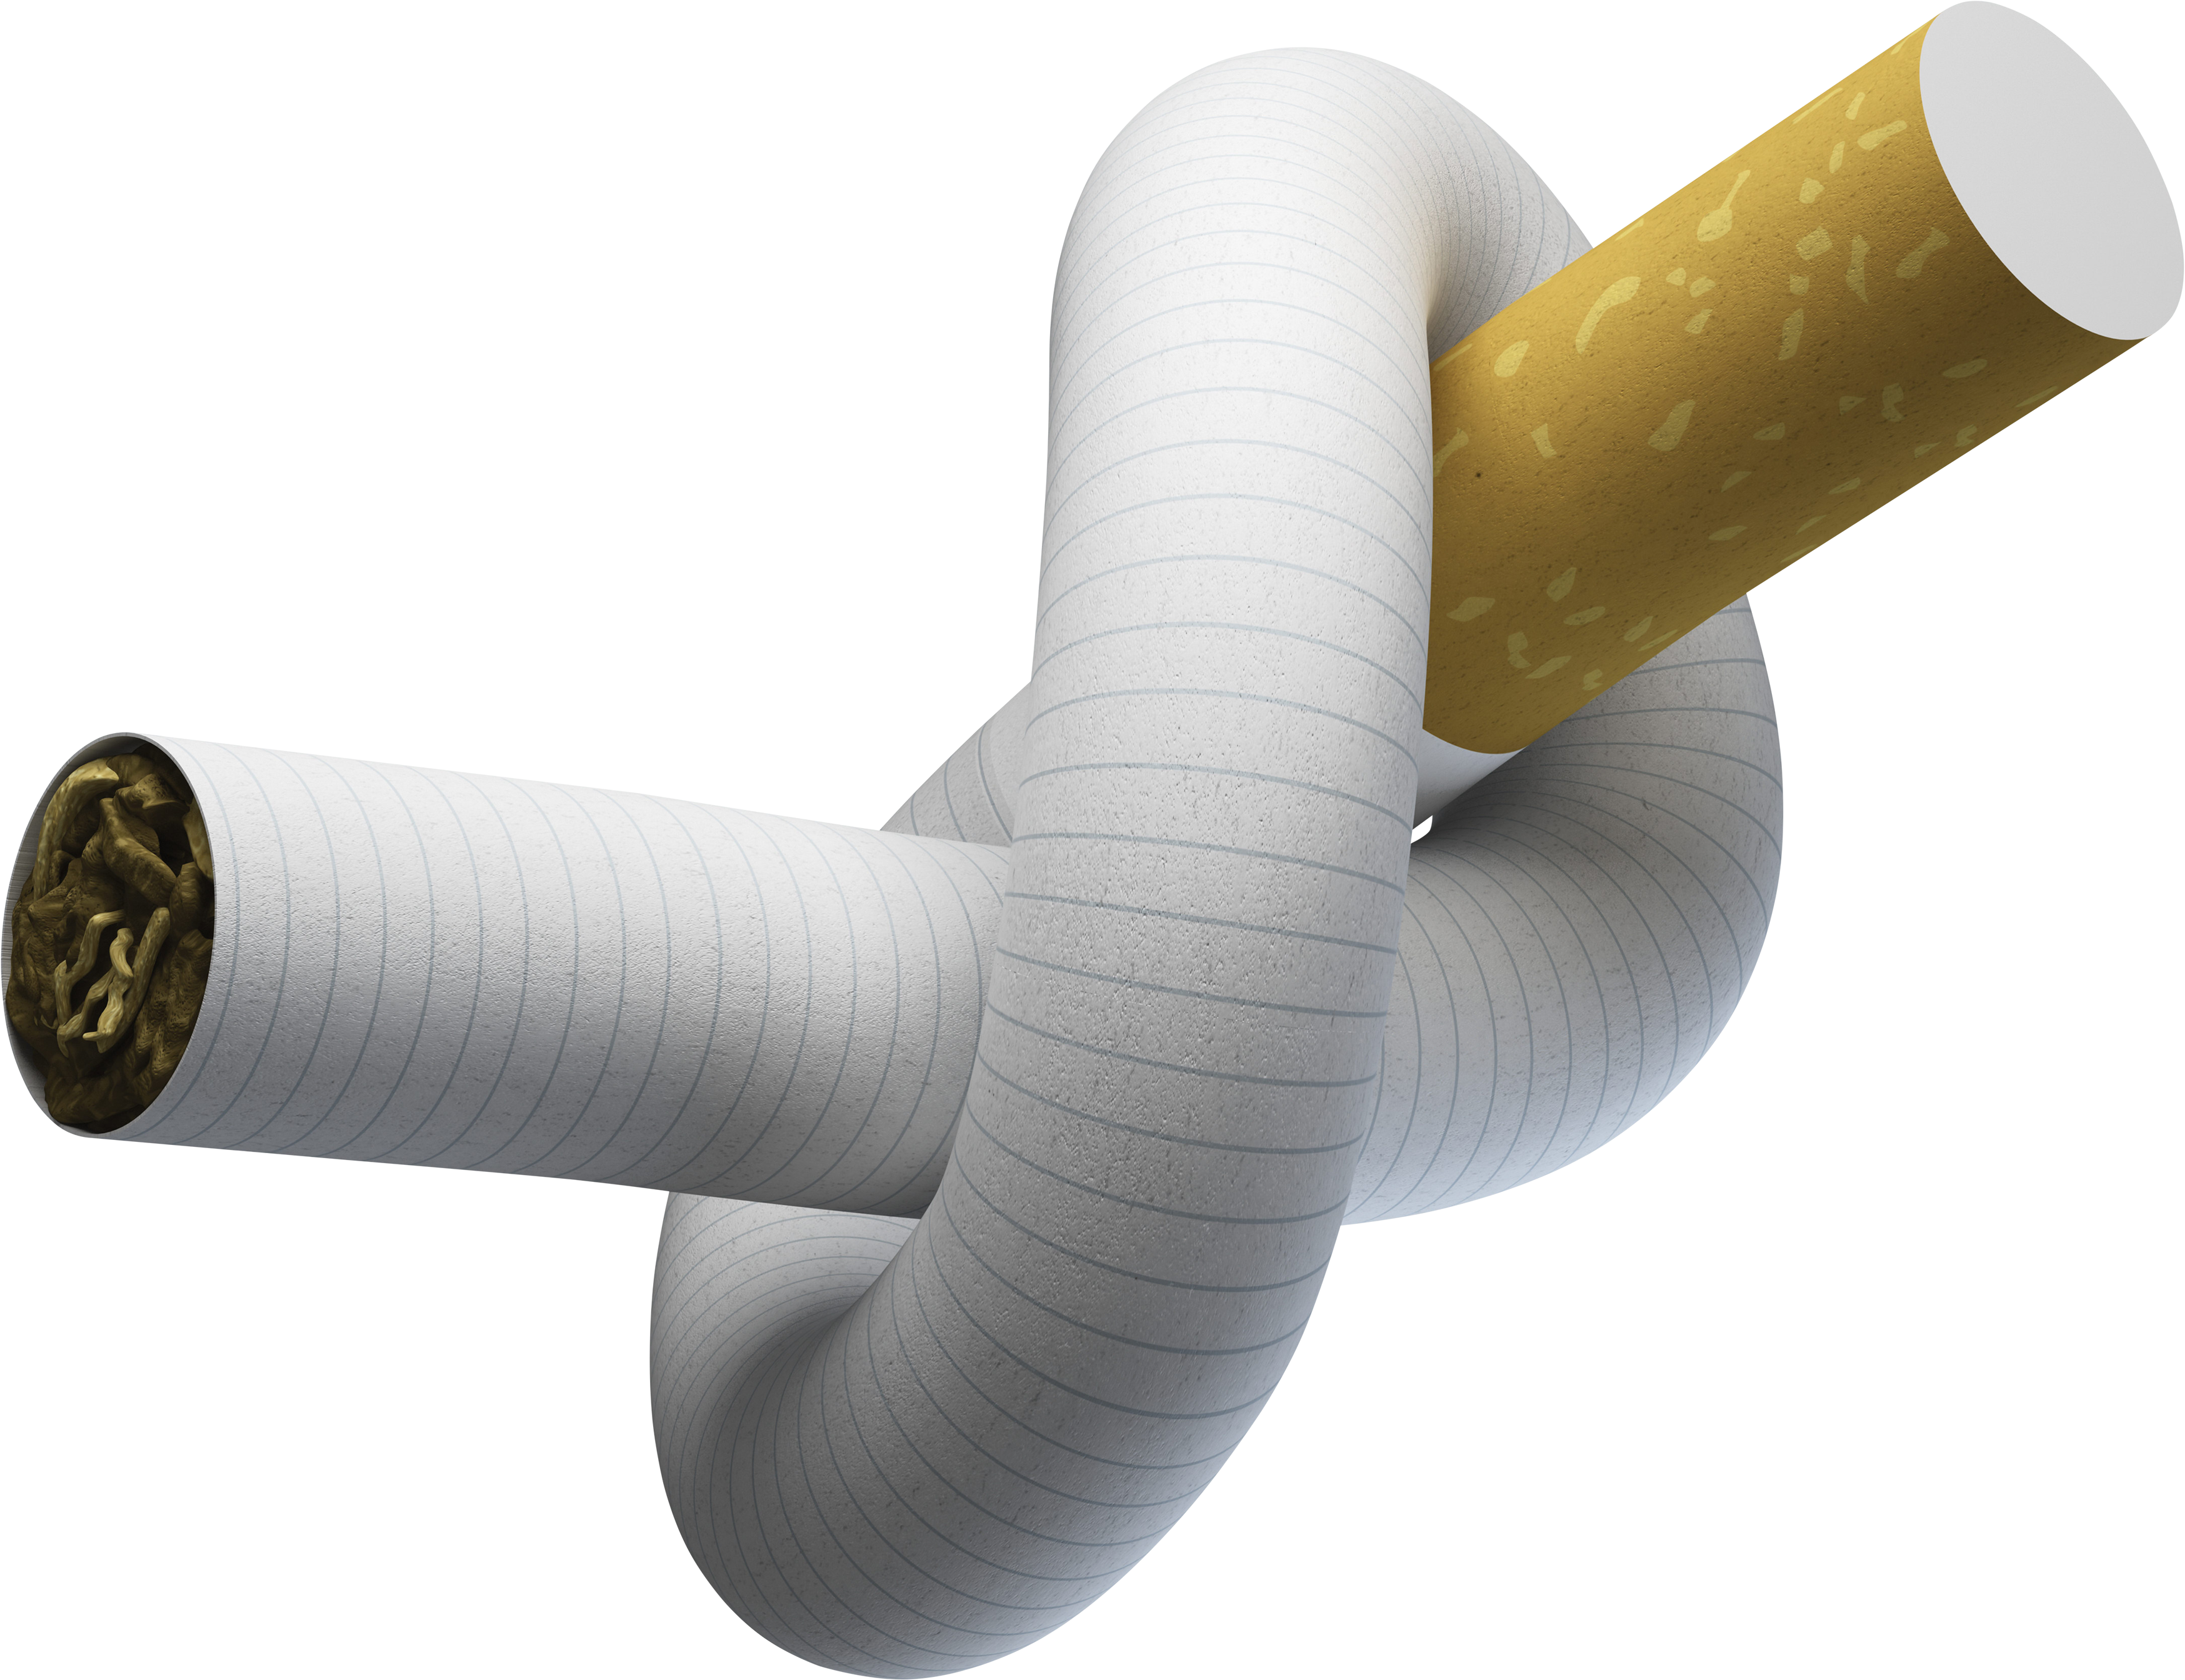 Cigar clipart pipe. Cigarette png image 